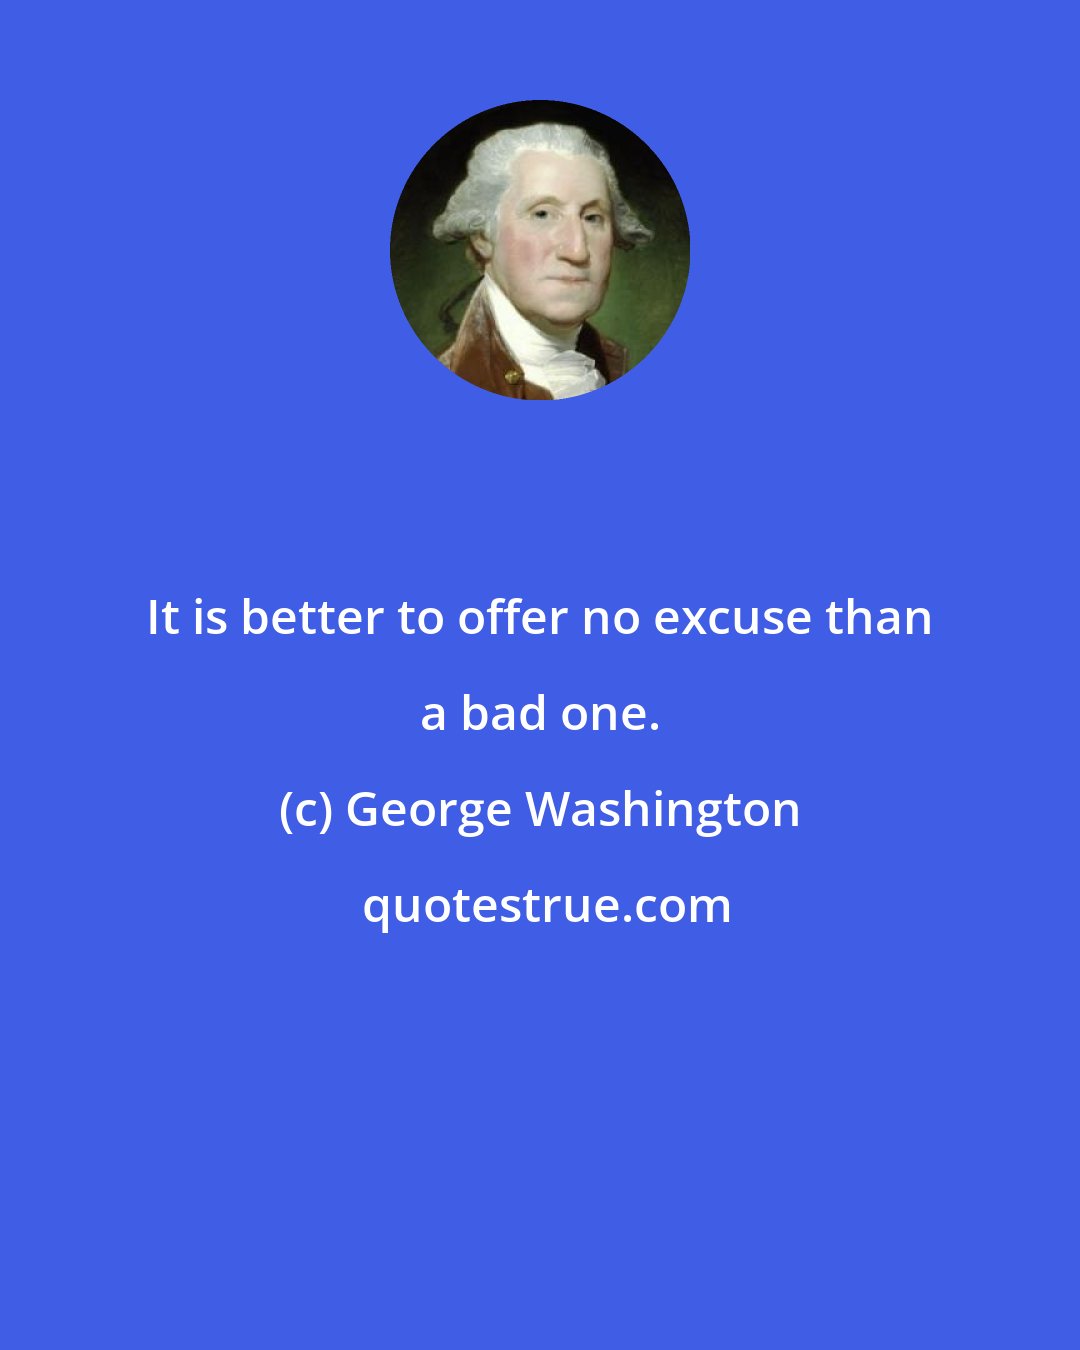 George Washington: It is better to offer no excuse than a bad one.